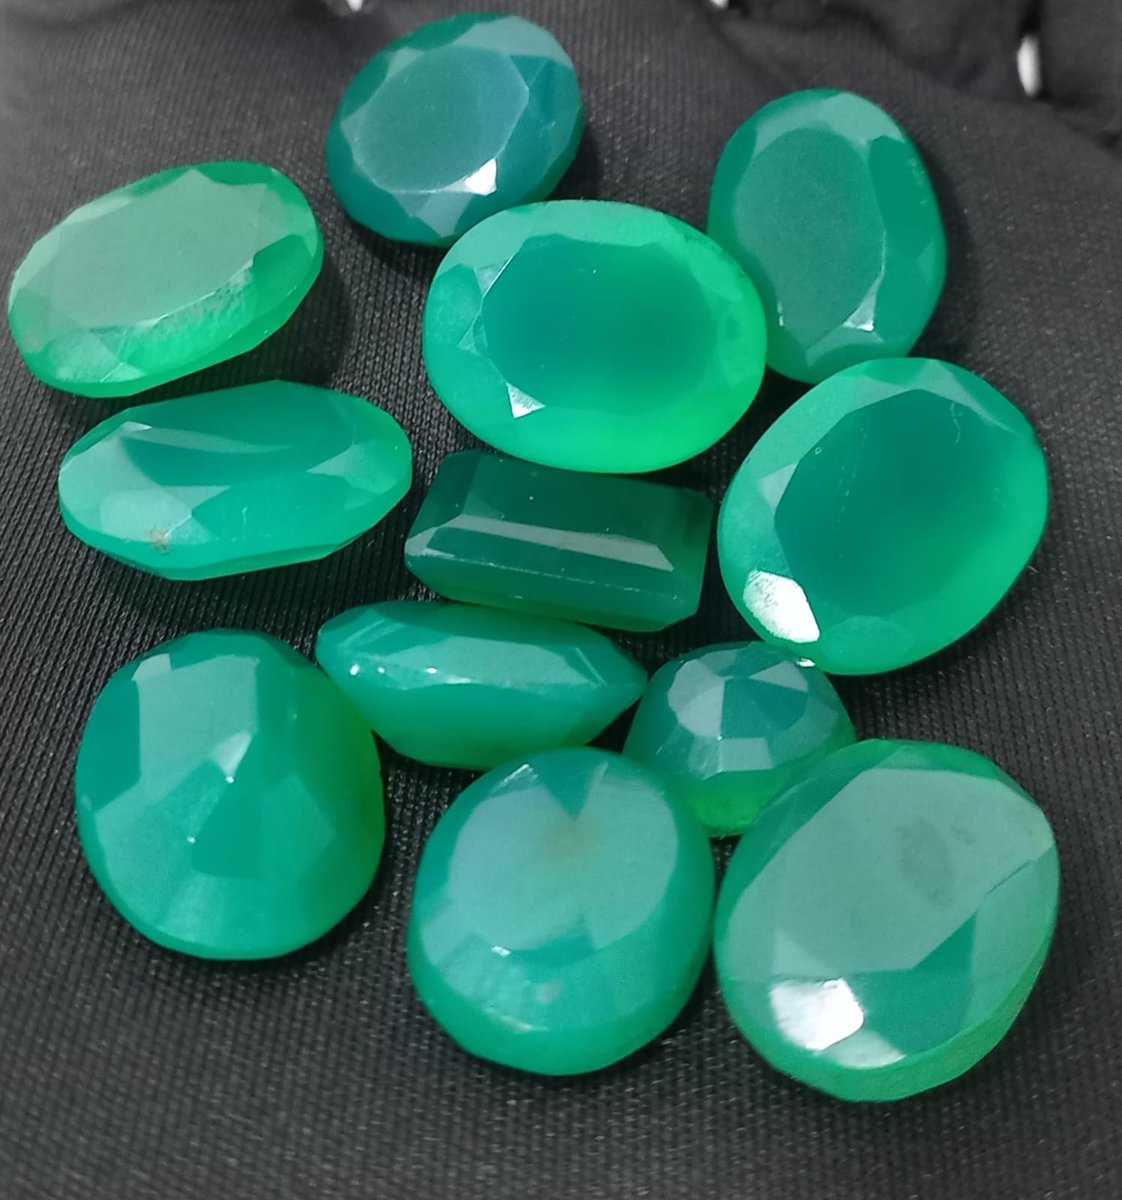 Natural And Best Quality Green Onyx Gemstone.

#Onyx #Naturalonyx #Naturalgreenonyx #Rashiratan #Astrologyonyx #Astrologygreenonyx #Greenonyx #Astrologygemstone #Greengems #Greenstone #Astrologygems #Astrologystone #Naturalonyxstone